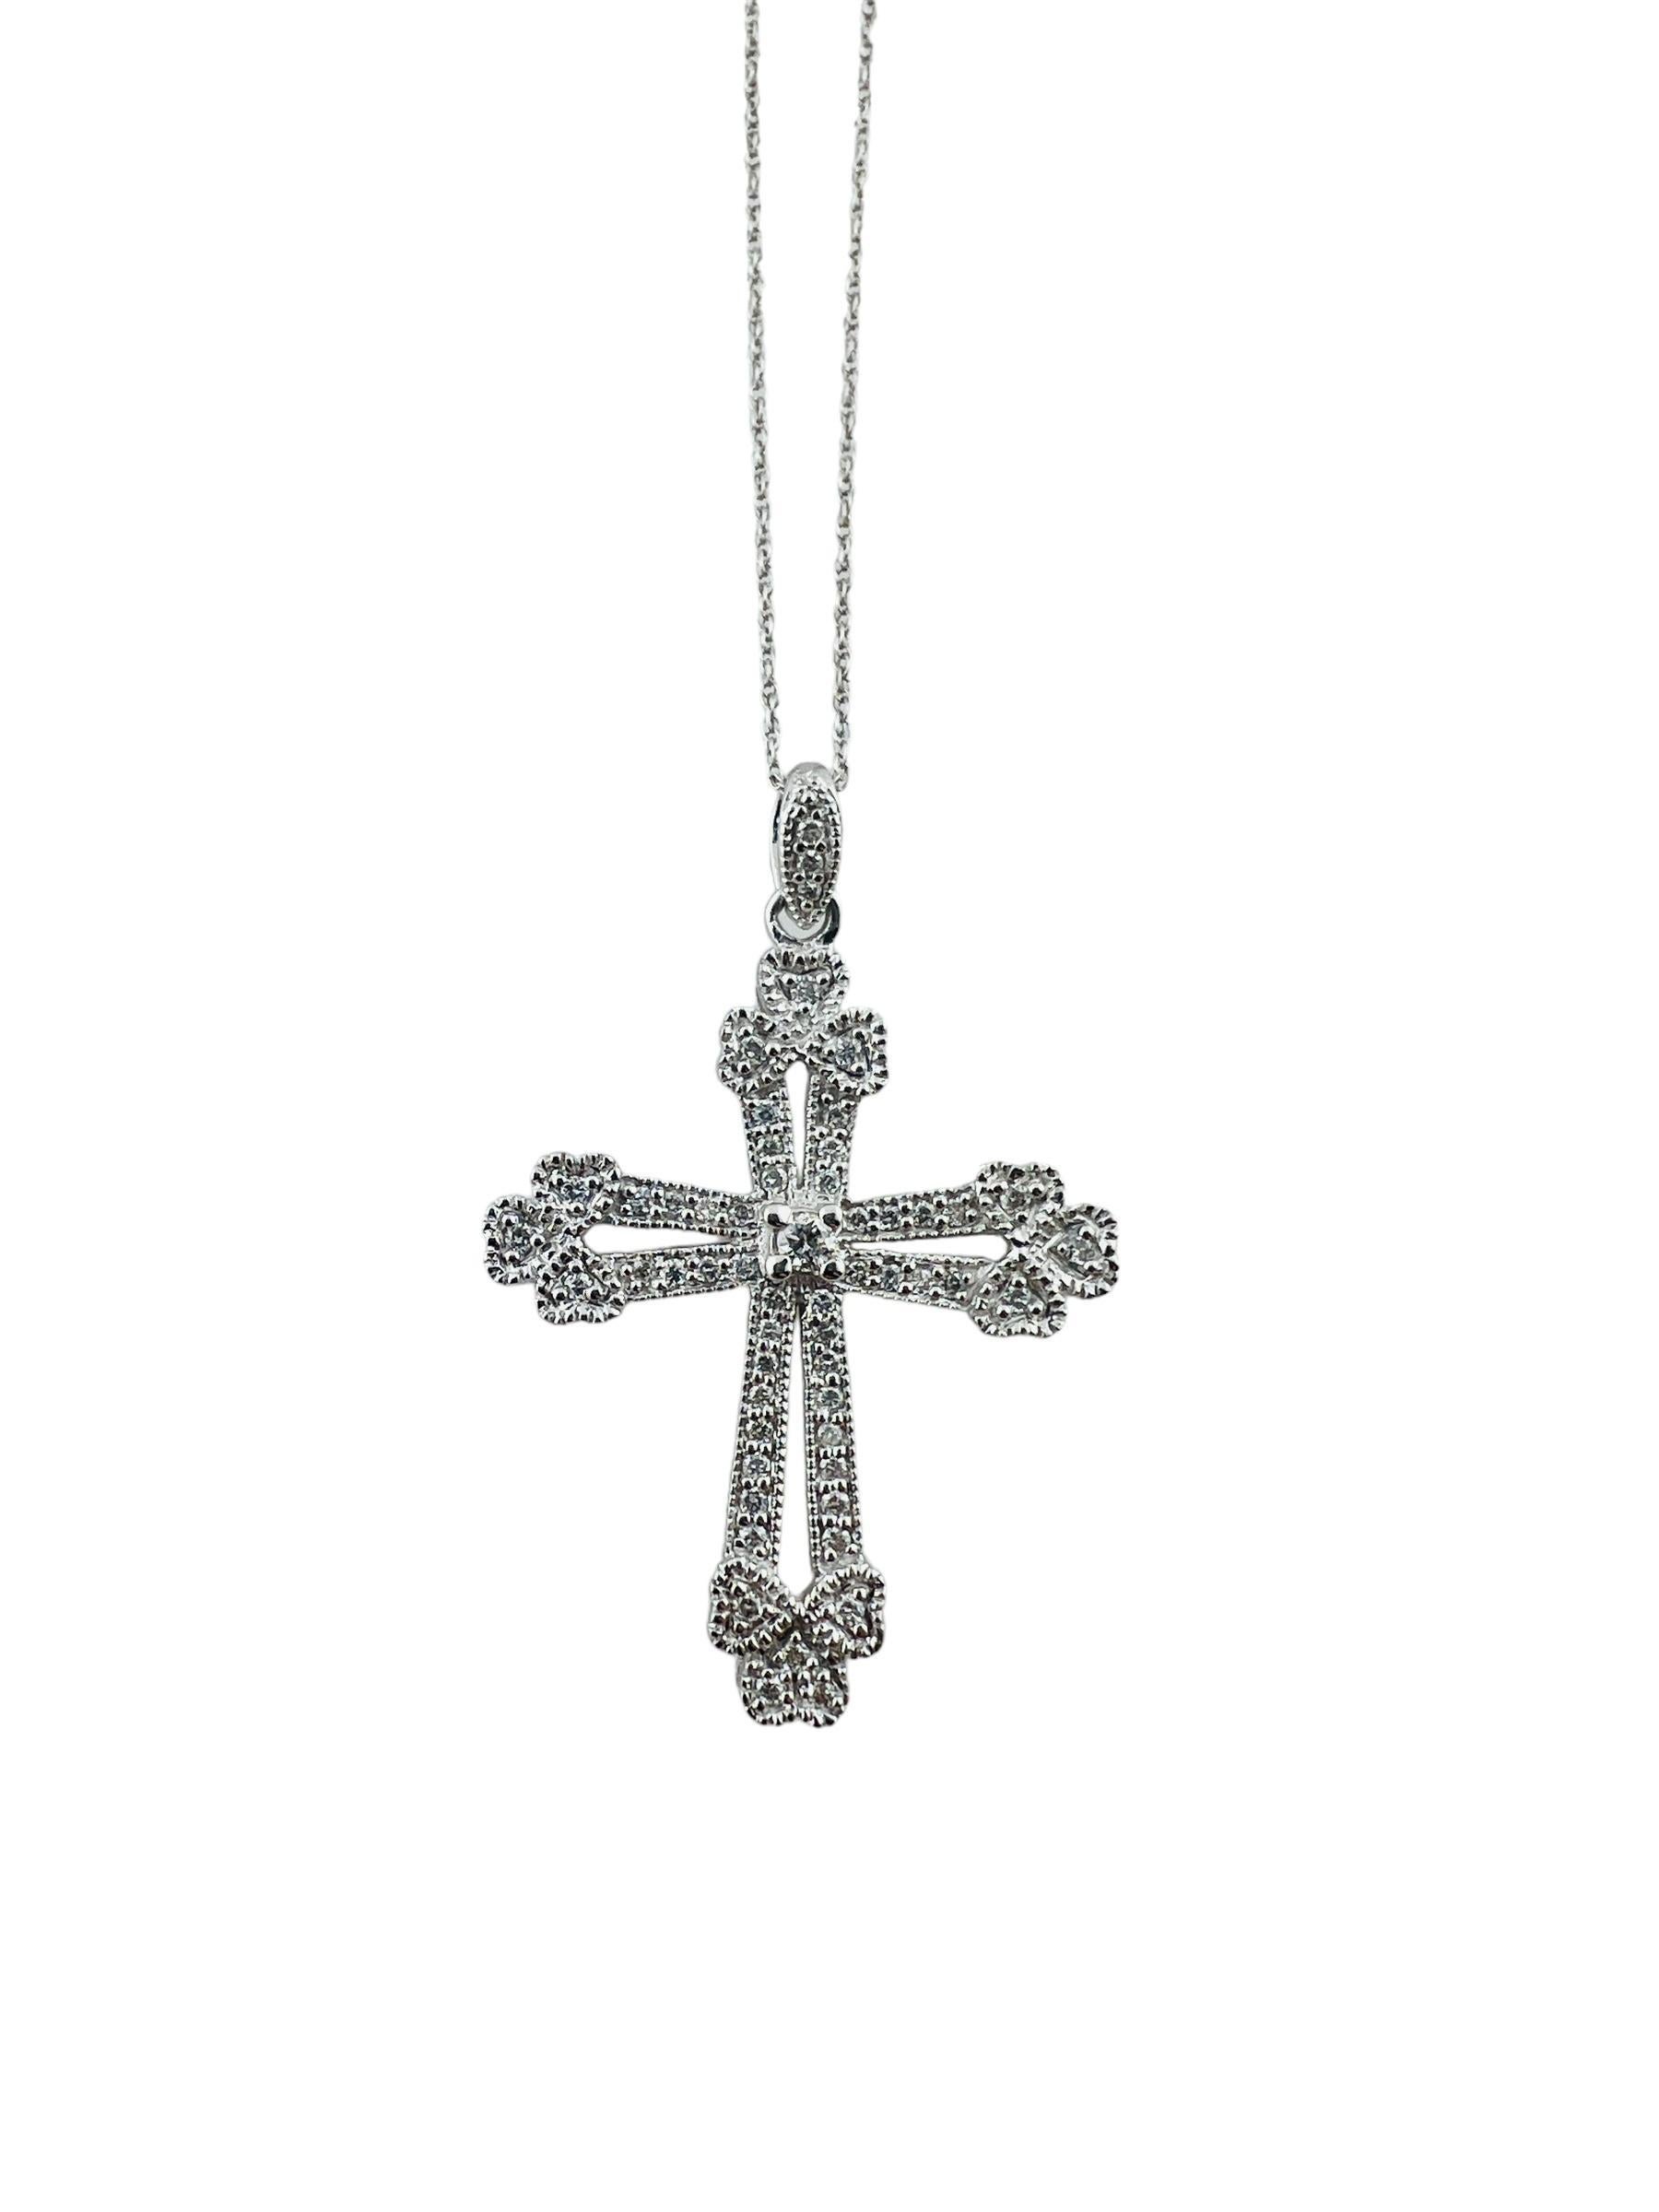 14 Karat White Gold and Diamond Cross Pendant Necklace #16633 For Sale 1